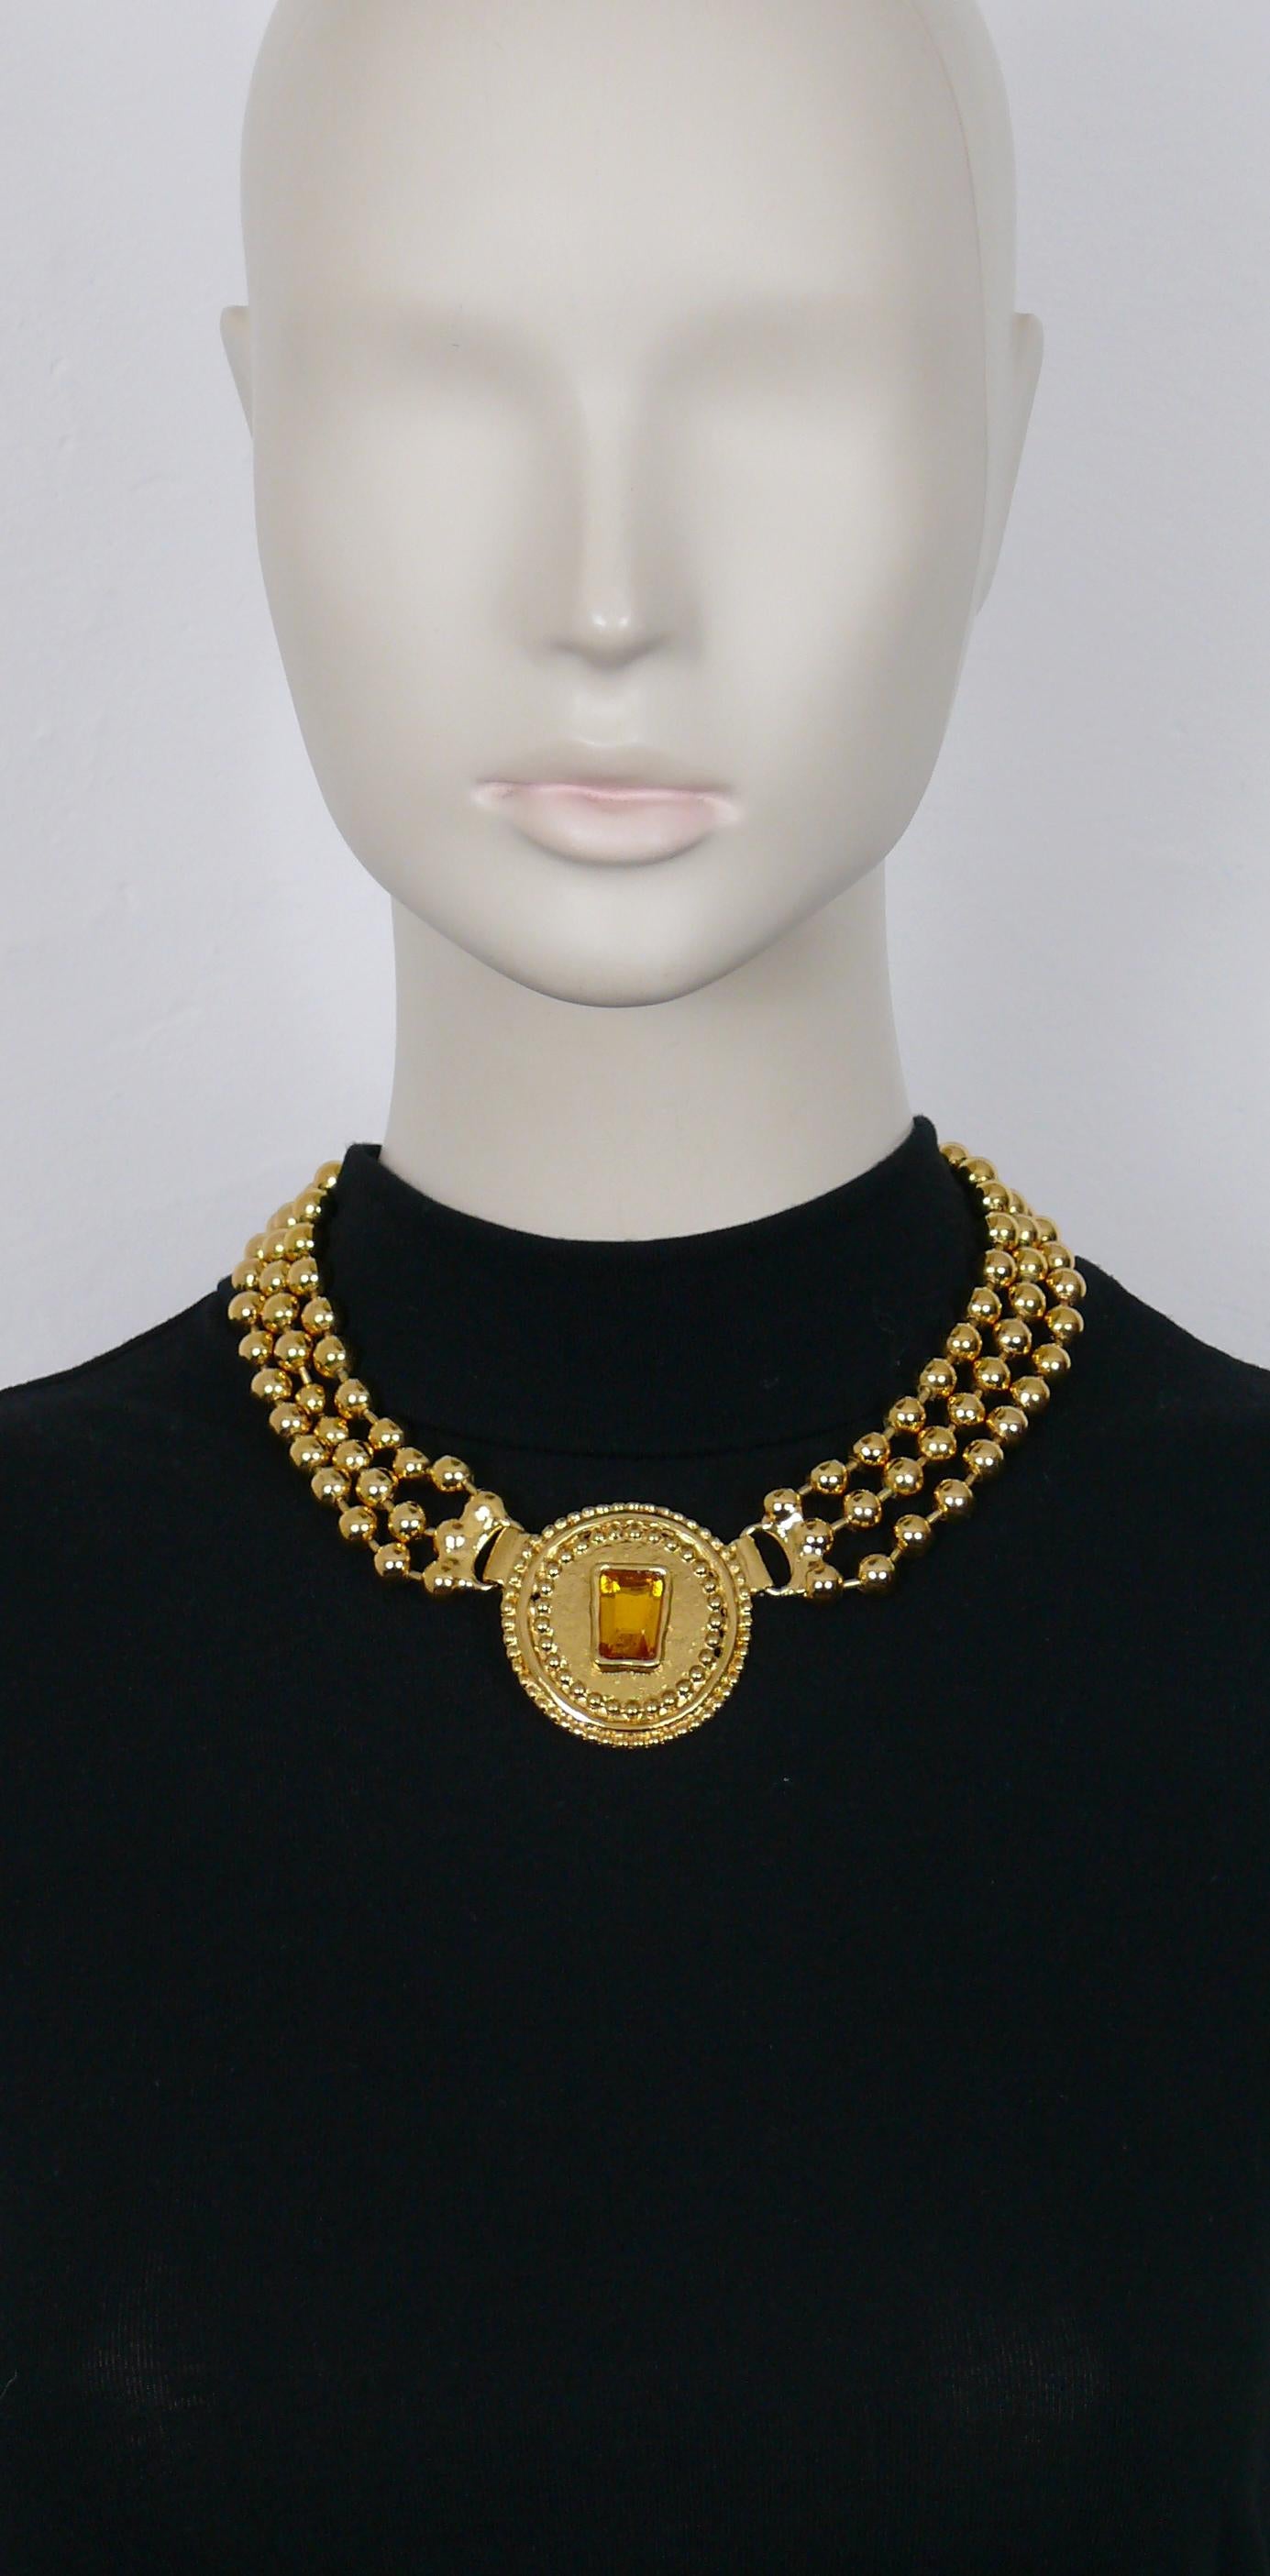 JEAN LOUIS SCHERRER vintage gold toned ball chains collar necklace featuring a shield shaped medallion embellished with an orange resin cabochon.

Hook clasp closure.

Marked SCHERRER Paris.
Made in France.

Indicative measurements : length approx.